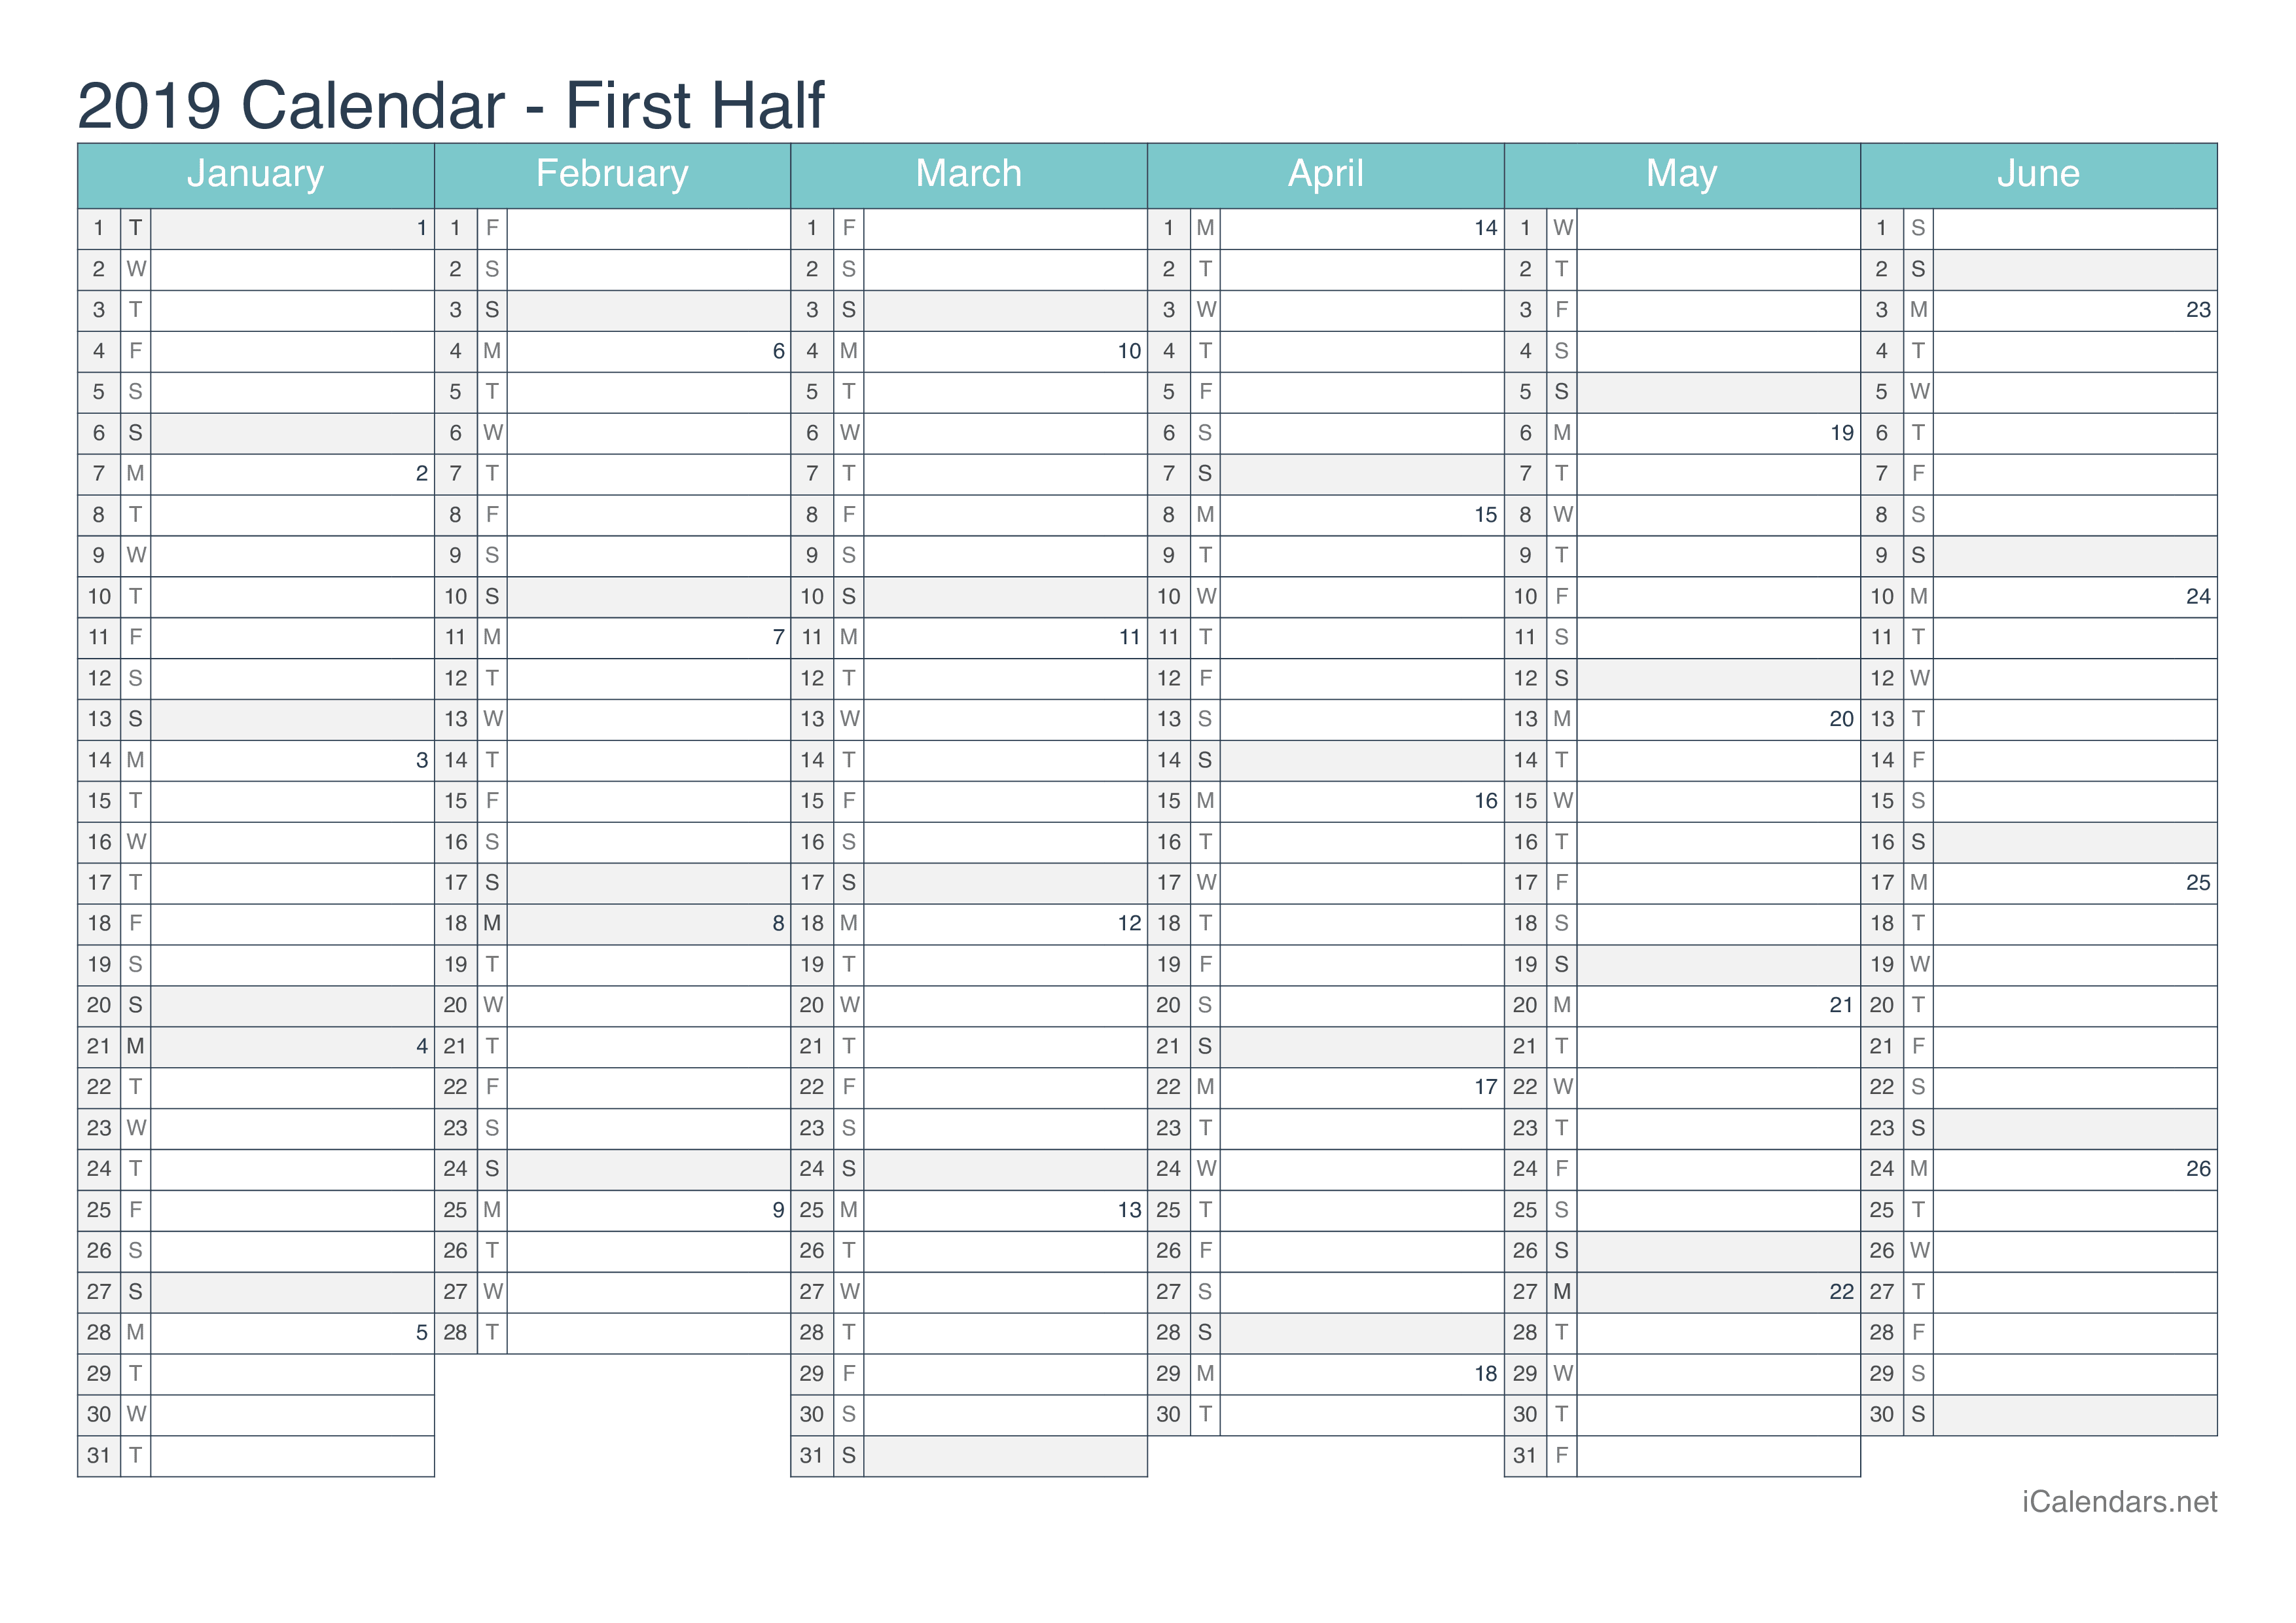 2019 Half year calendar with week numbers - Turquoise